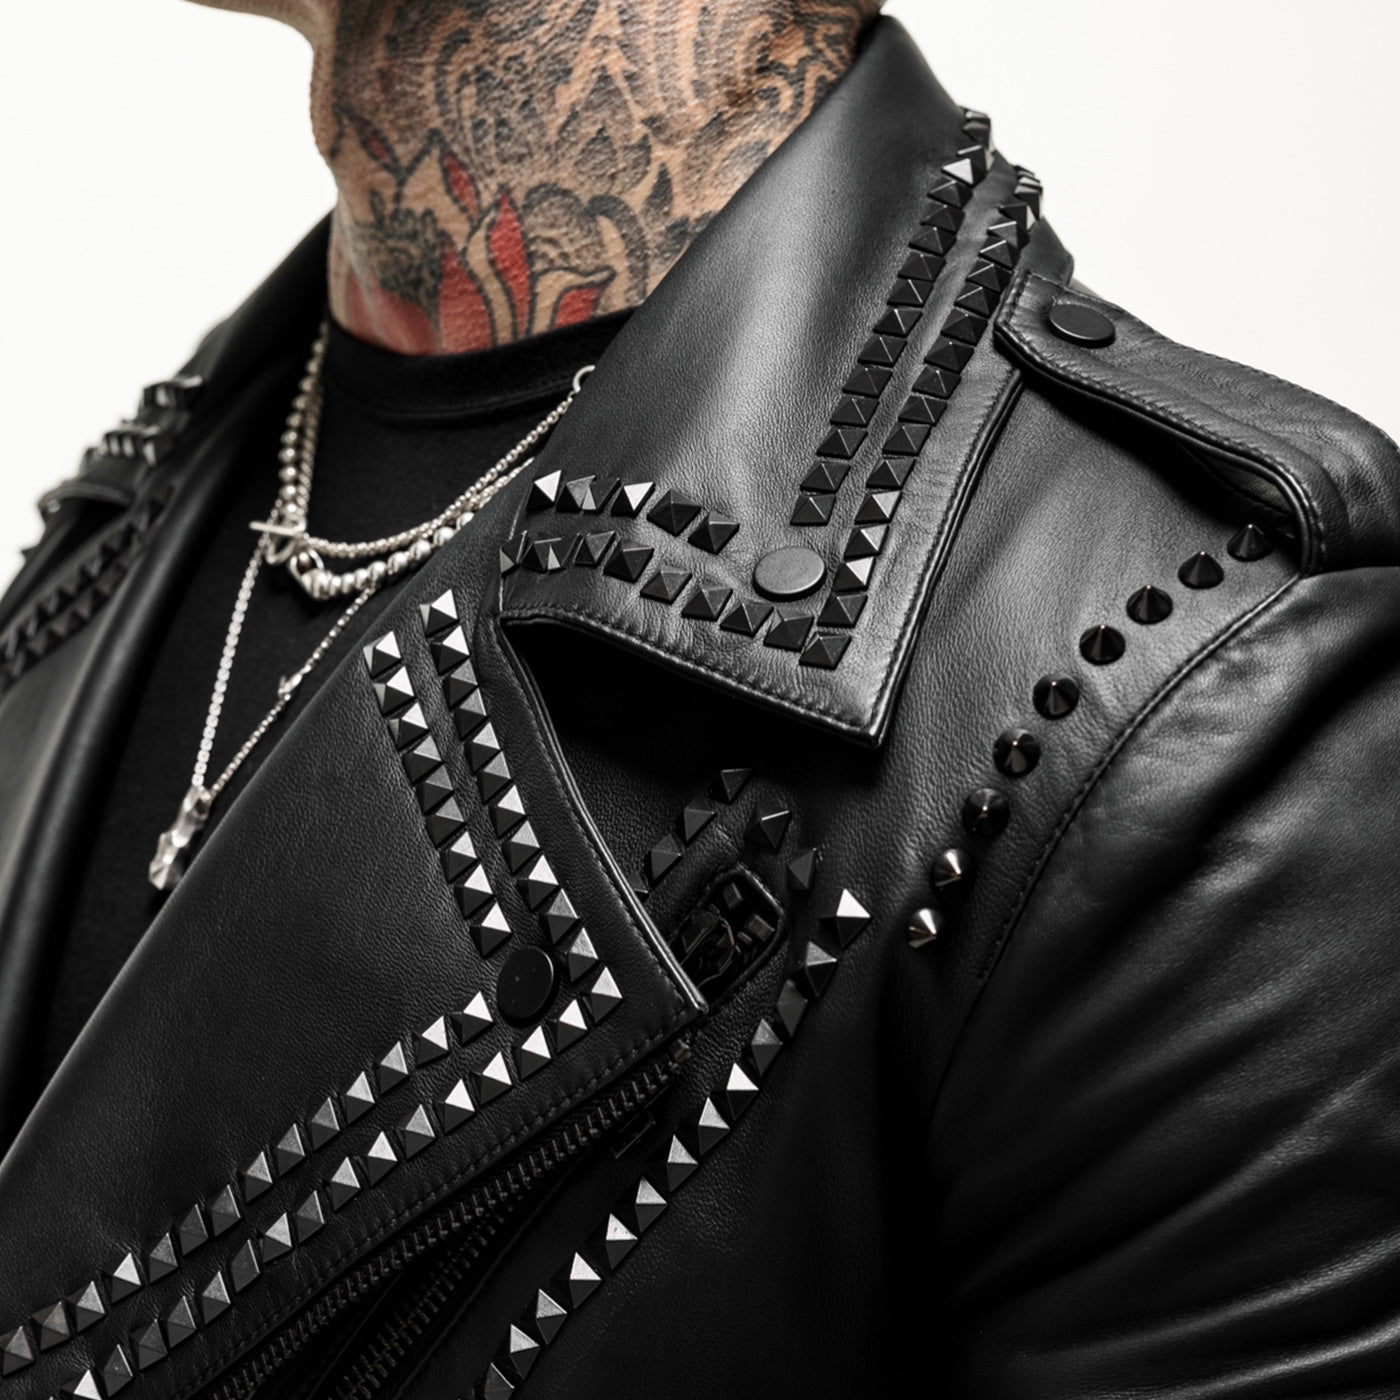 Printed Raving Wolf 2.0 Studded Leather Jacket